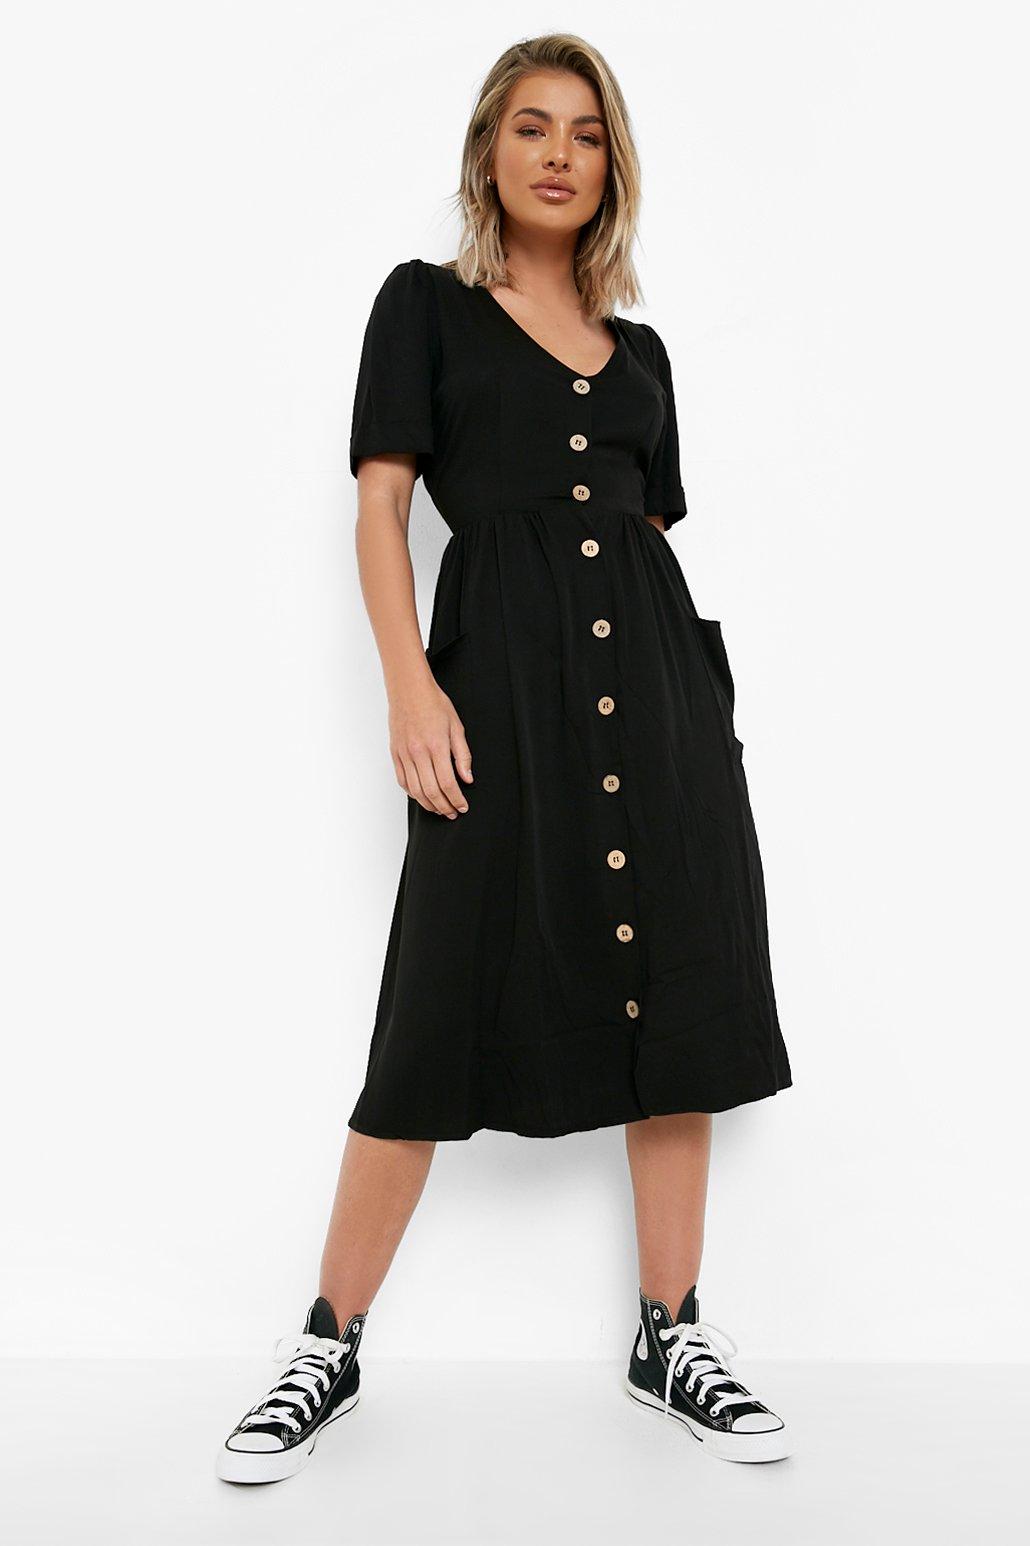 dress with buttons down the front